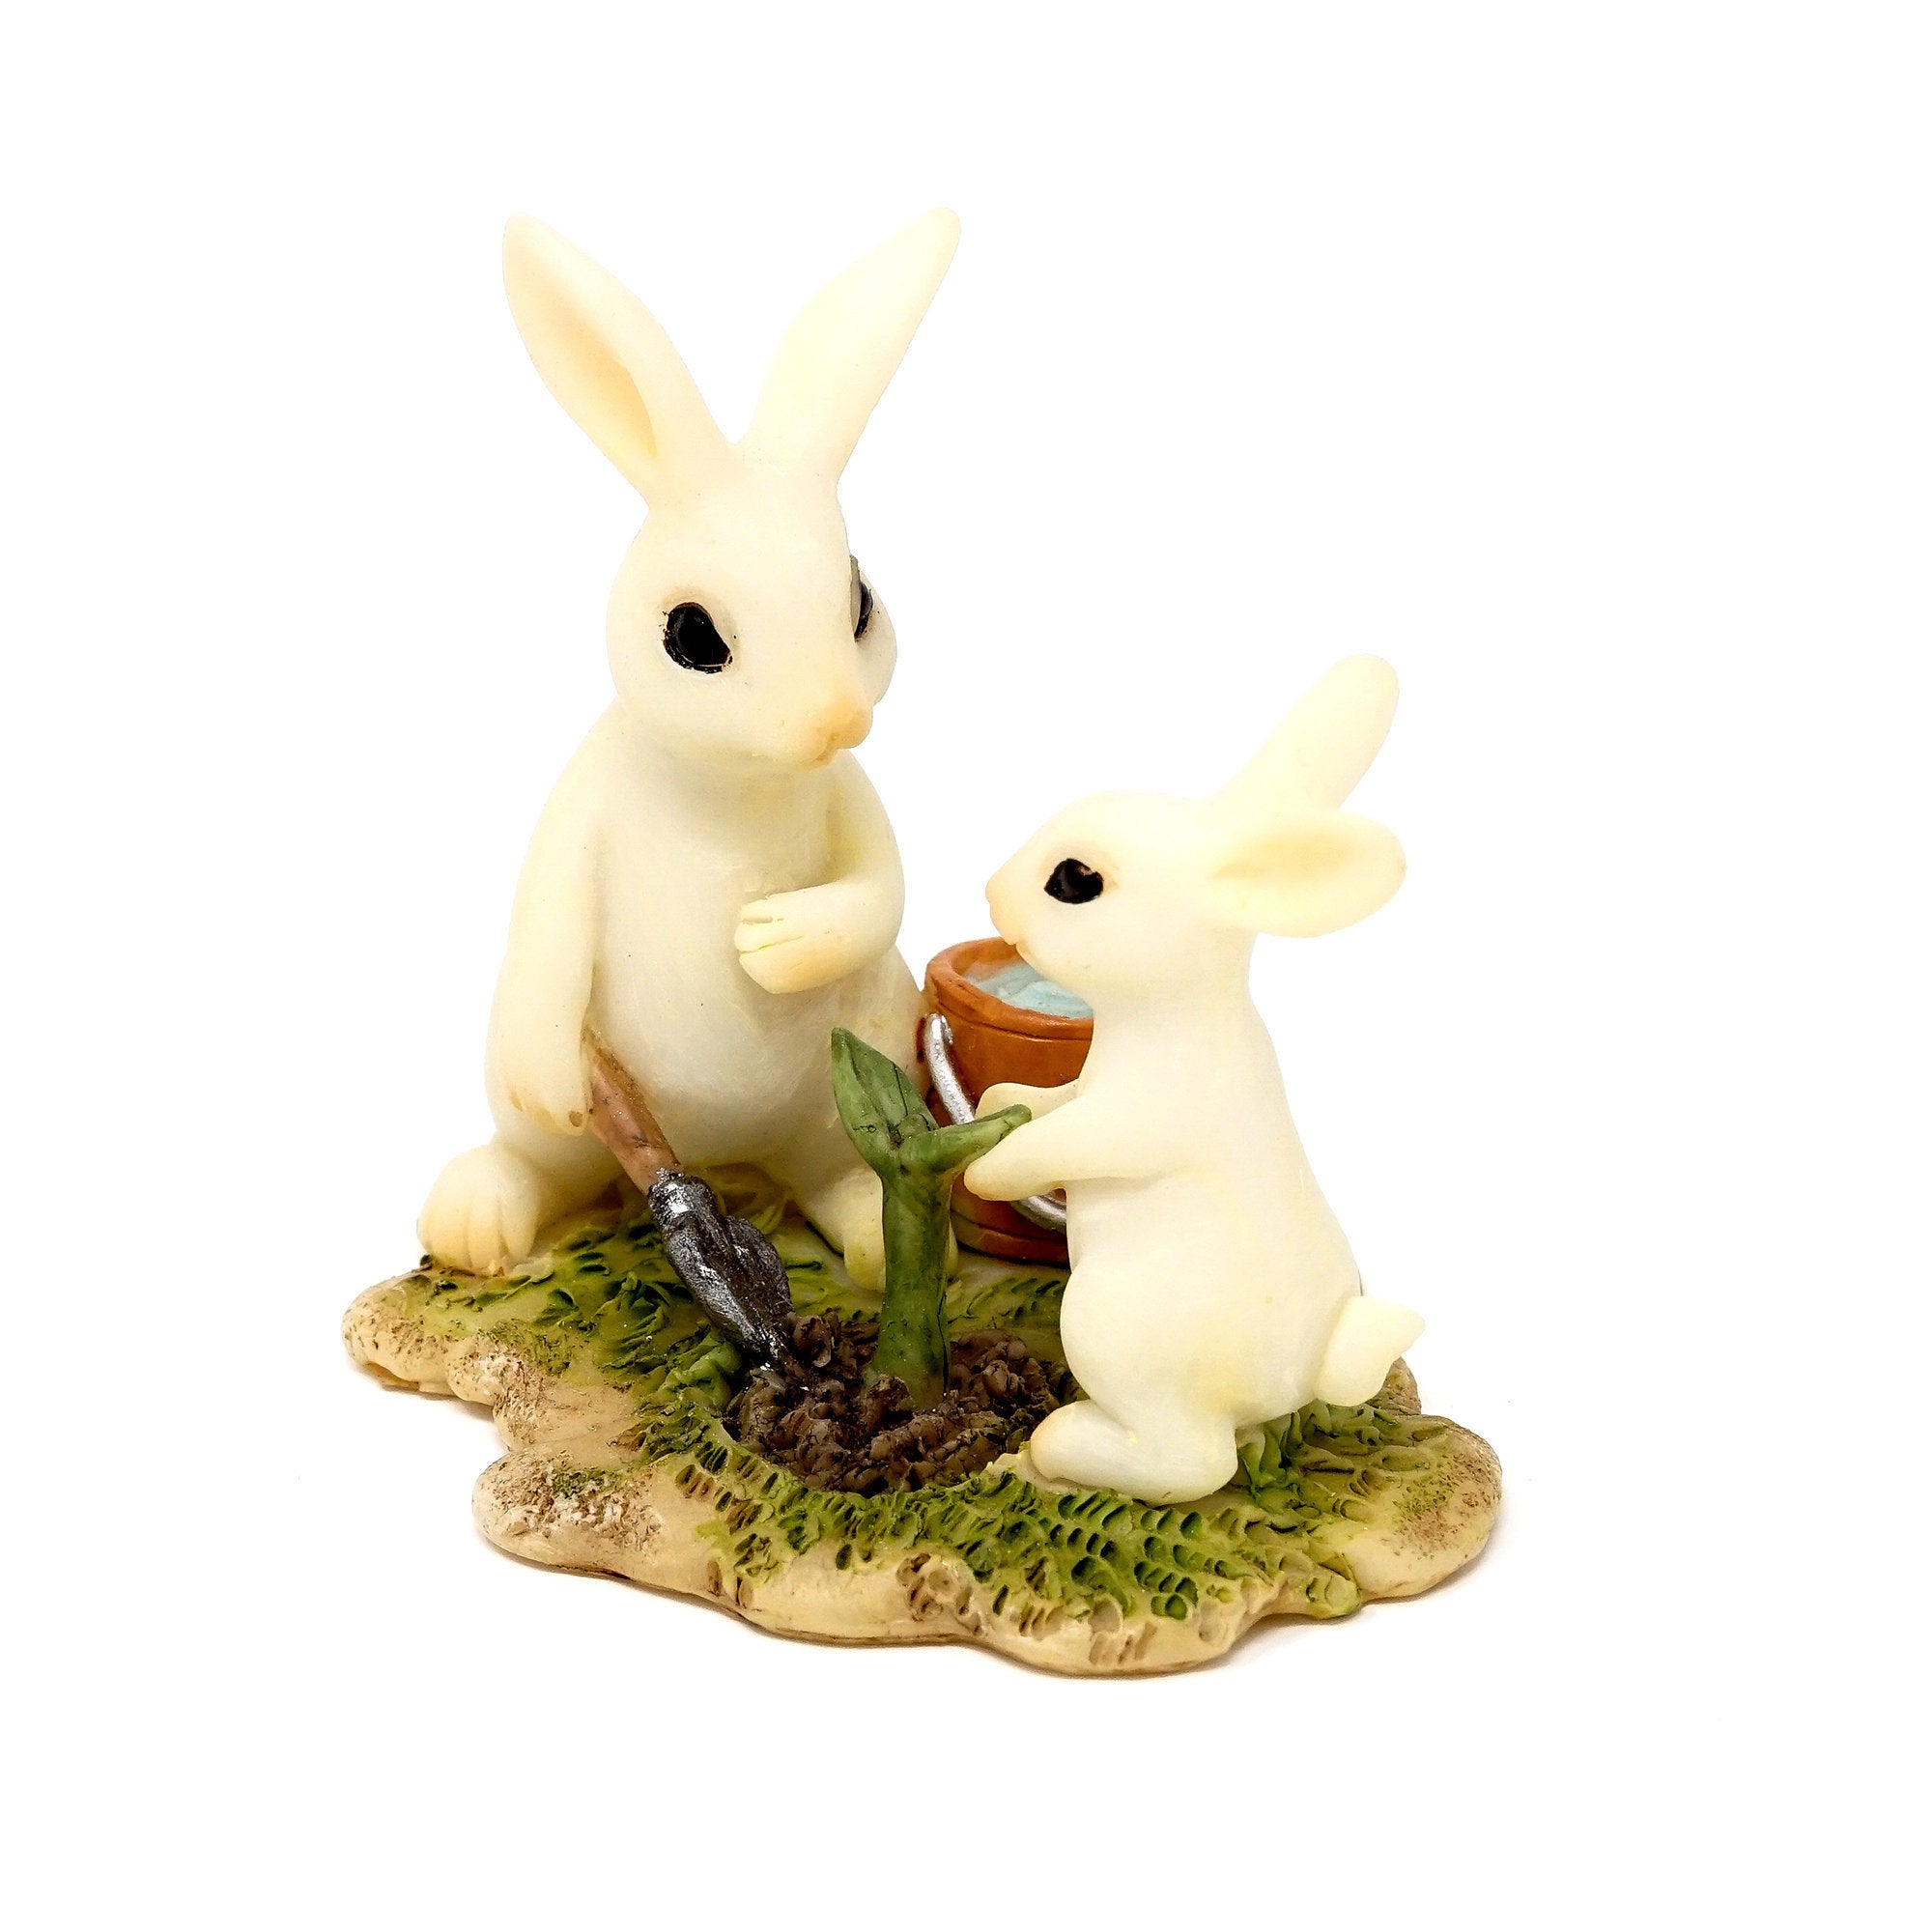 Bunny Gardener Planting Cutting with Little Bunny, Mini Bunny, Mini Rabbit, Fairy Garden Bunny, Fairy Garden Rabbit, Bunny Gardeners, Fairy Garden - image 2 of 4